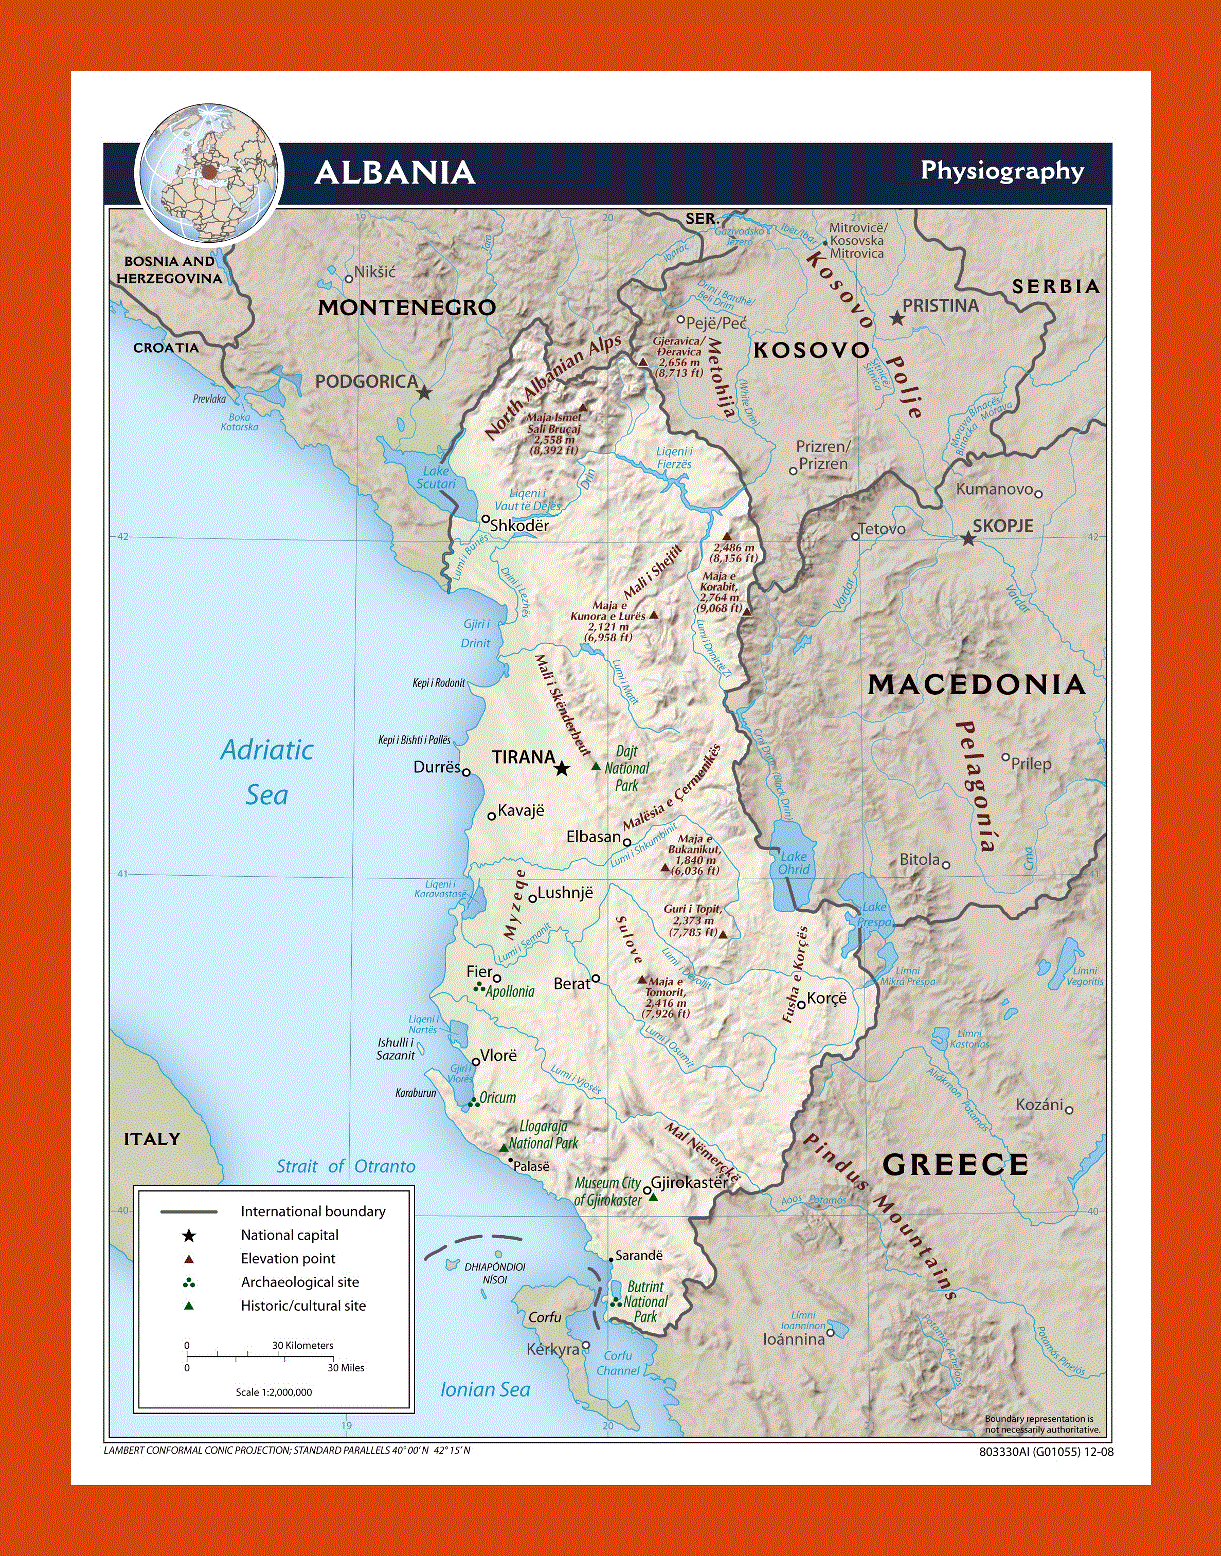 Physiography map of Albania - 2008